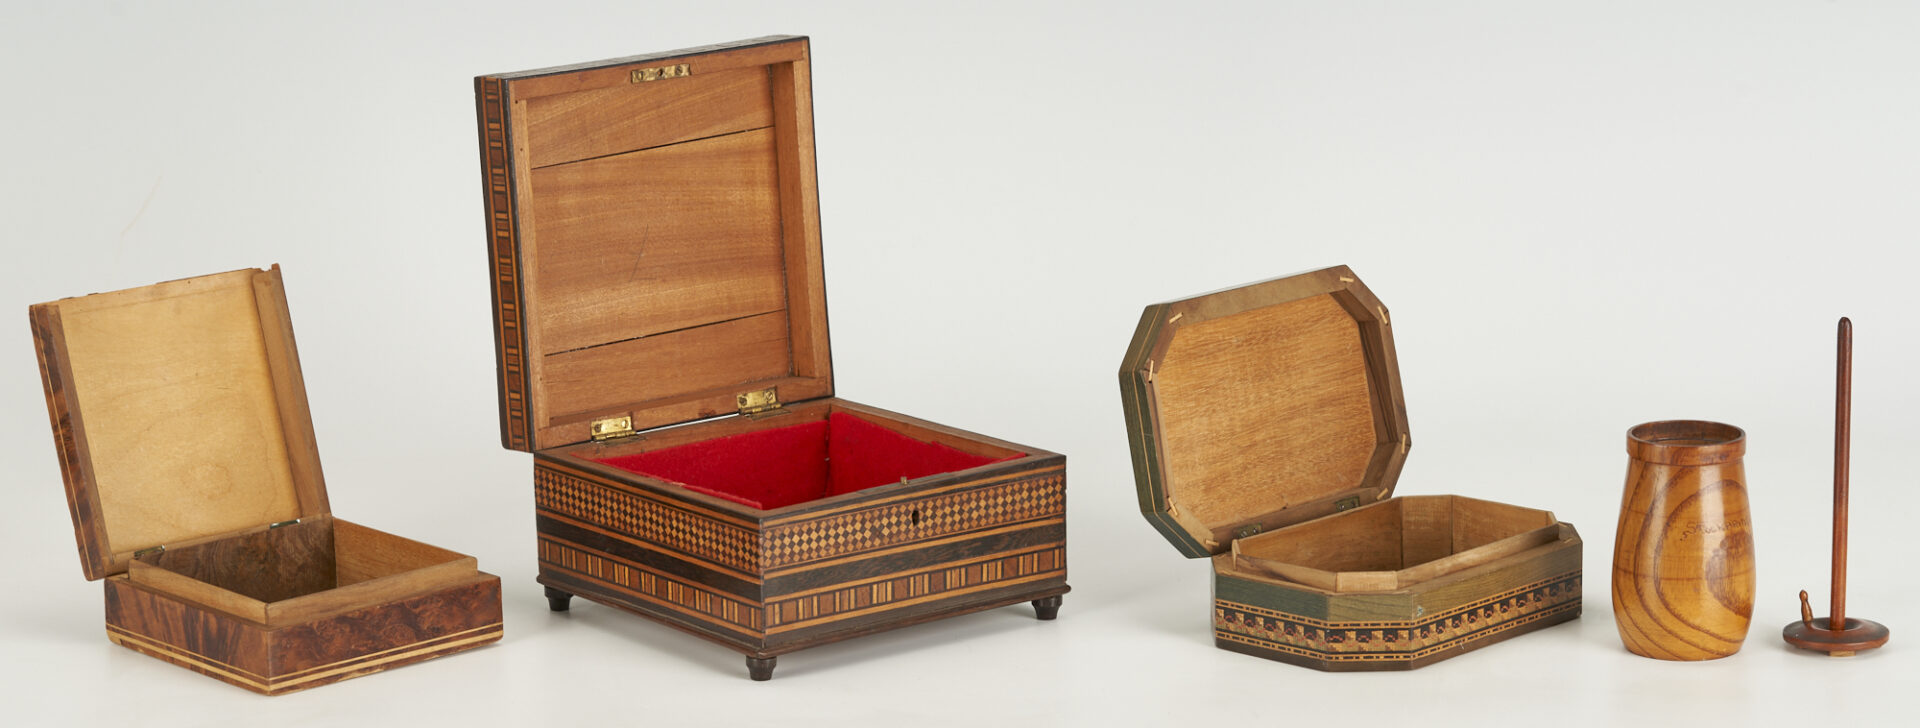 Lot 6: 3 Inlaid Boxes & Miniature Butter Churn